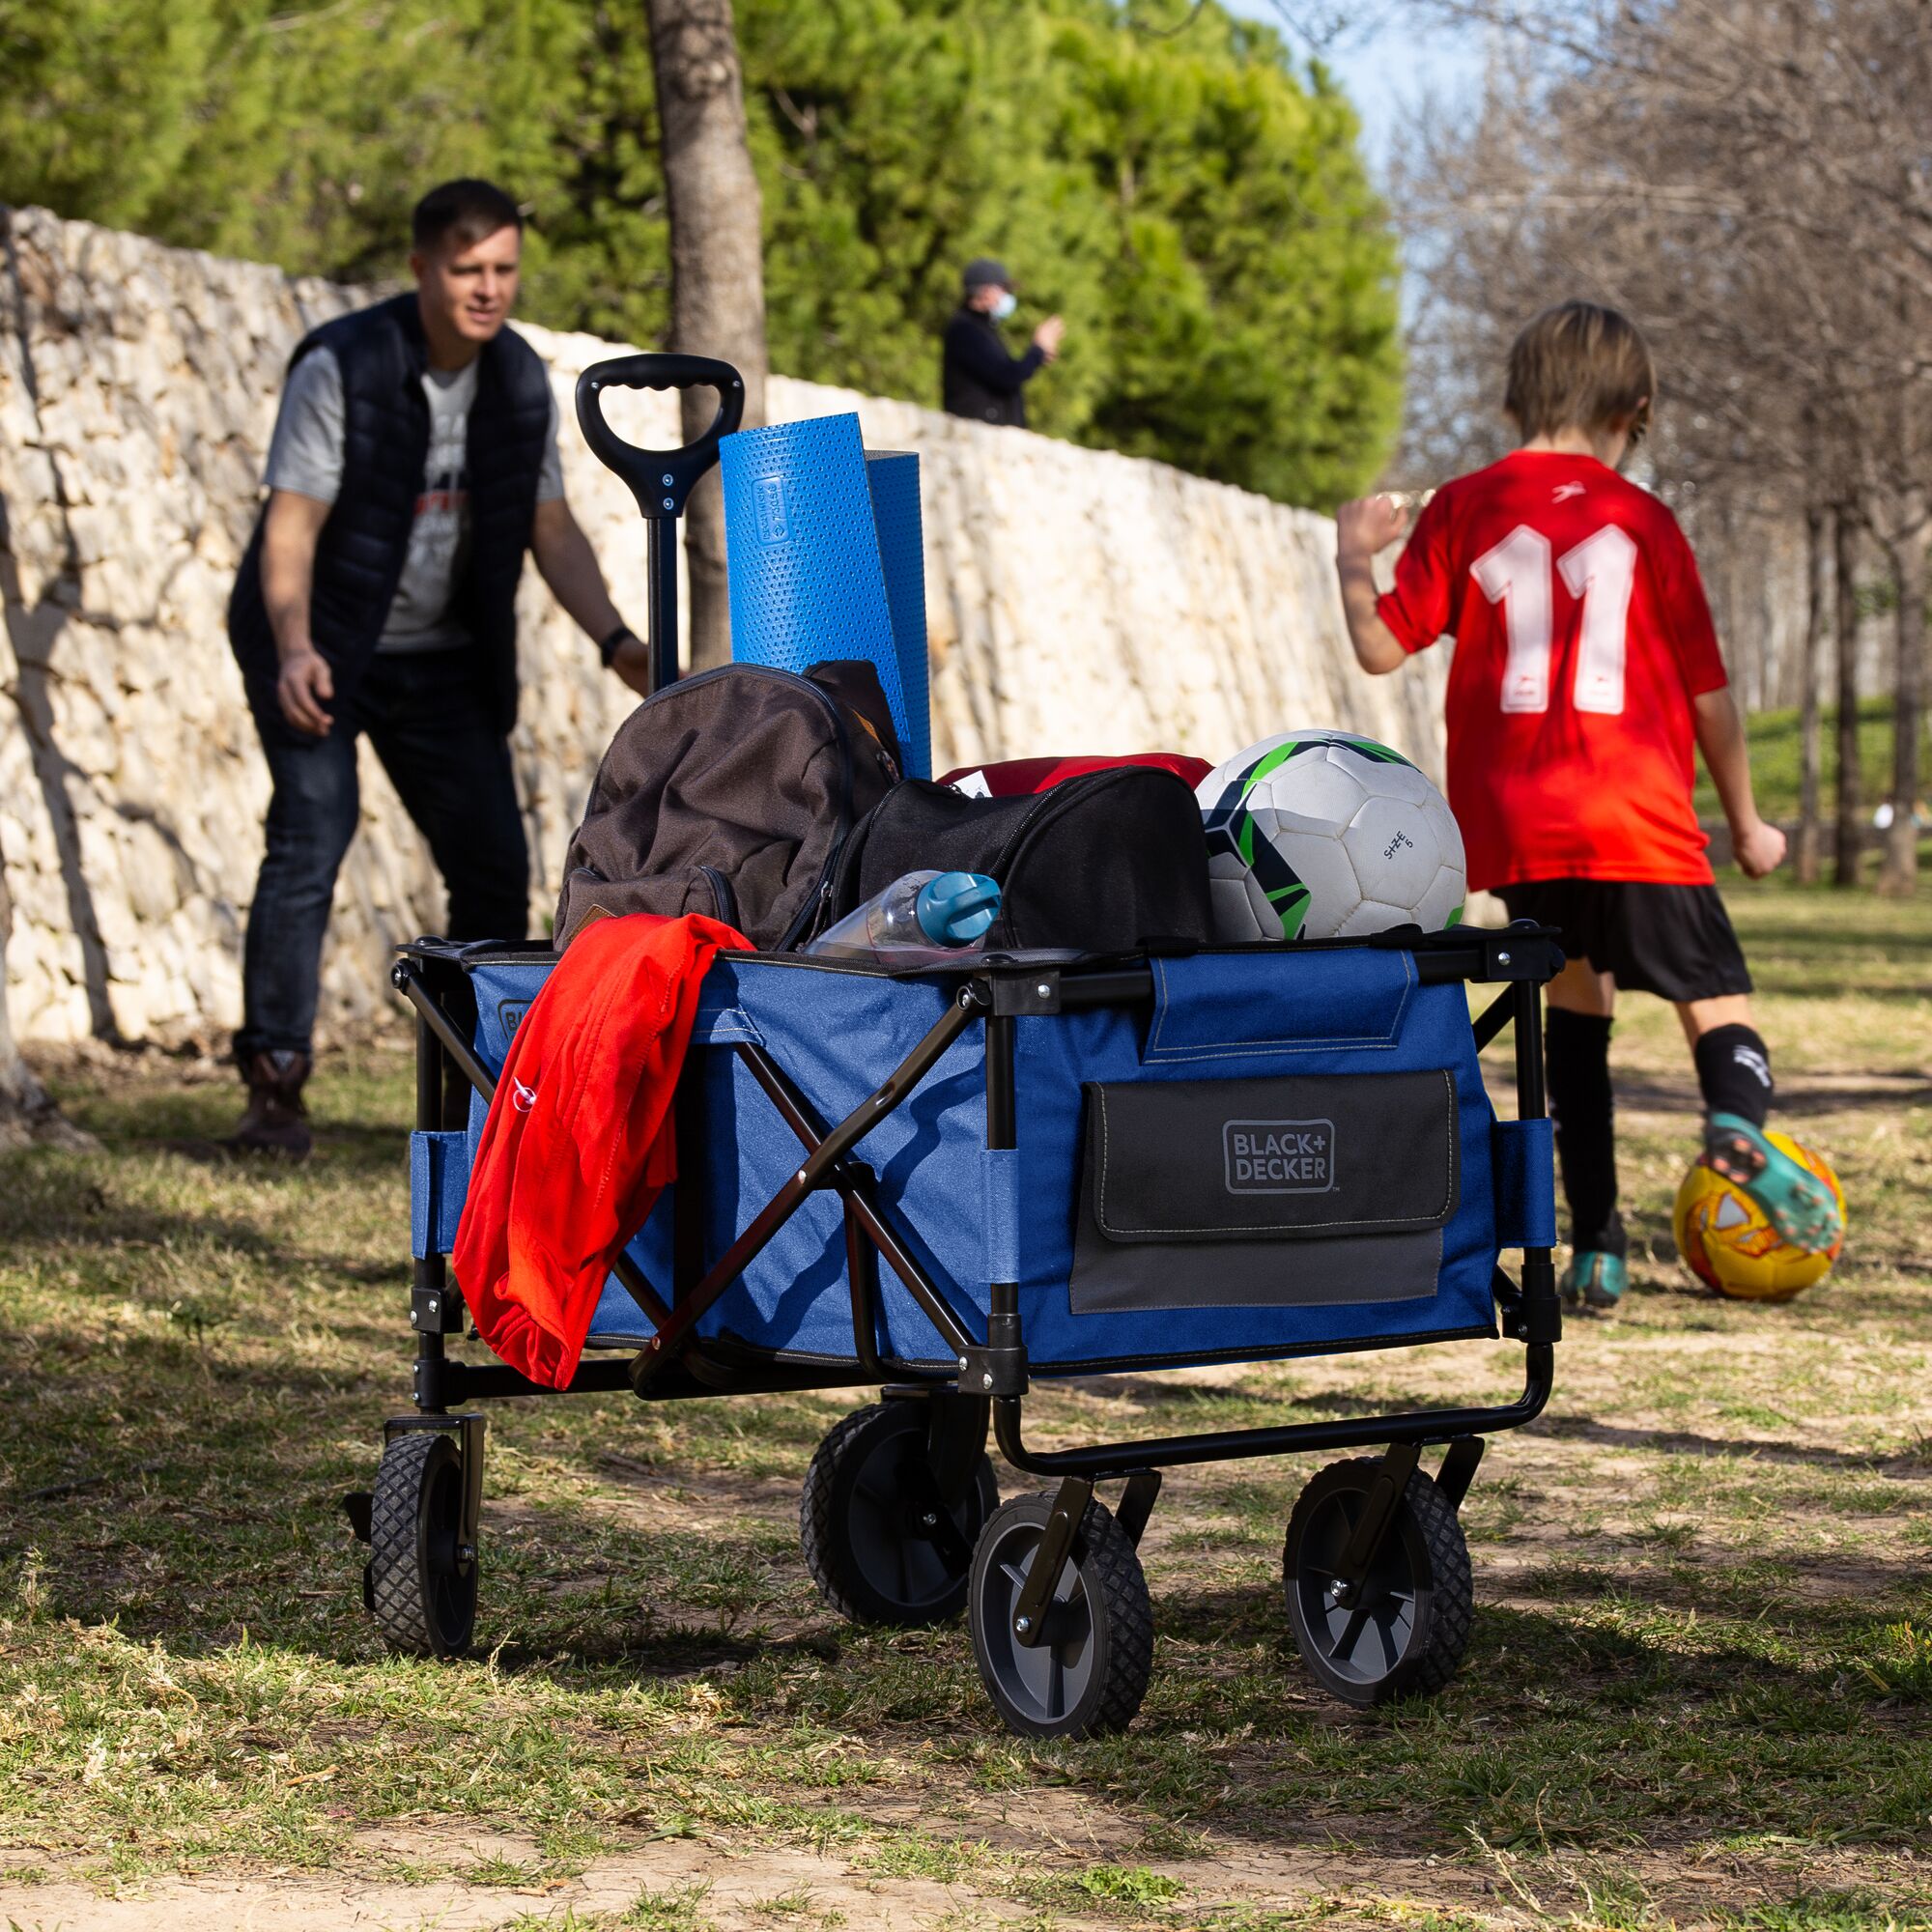 Utility wagon folding or collapsible blue holding personal items.